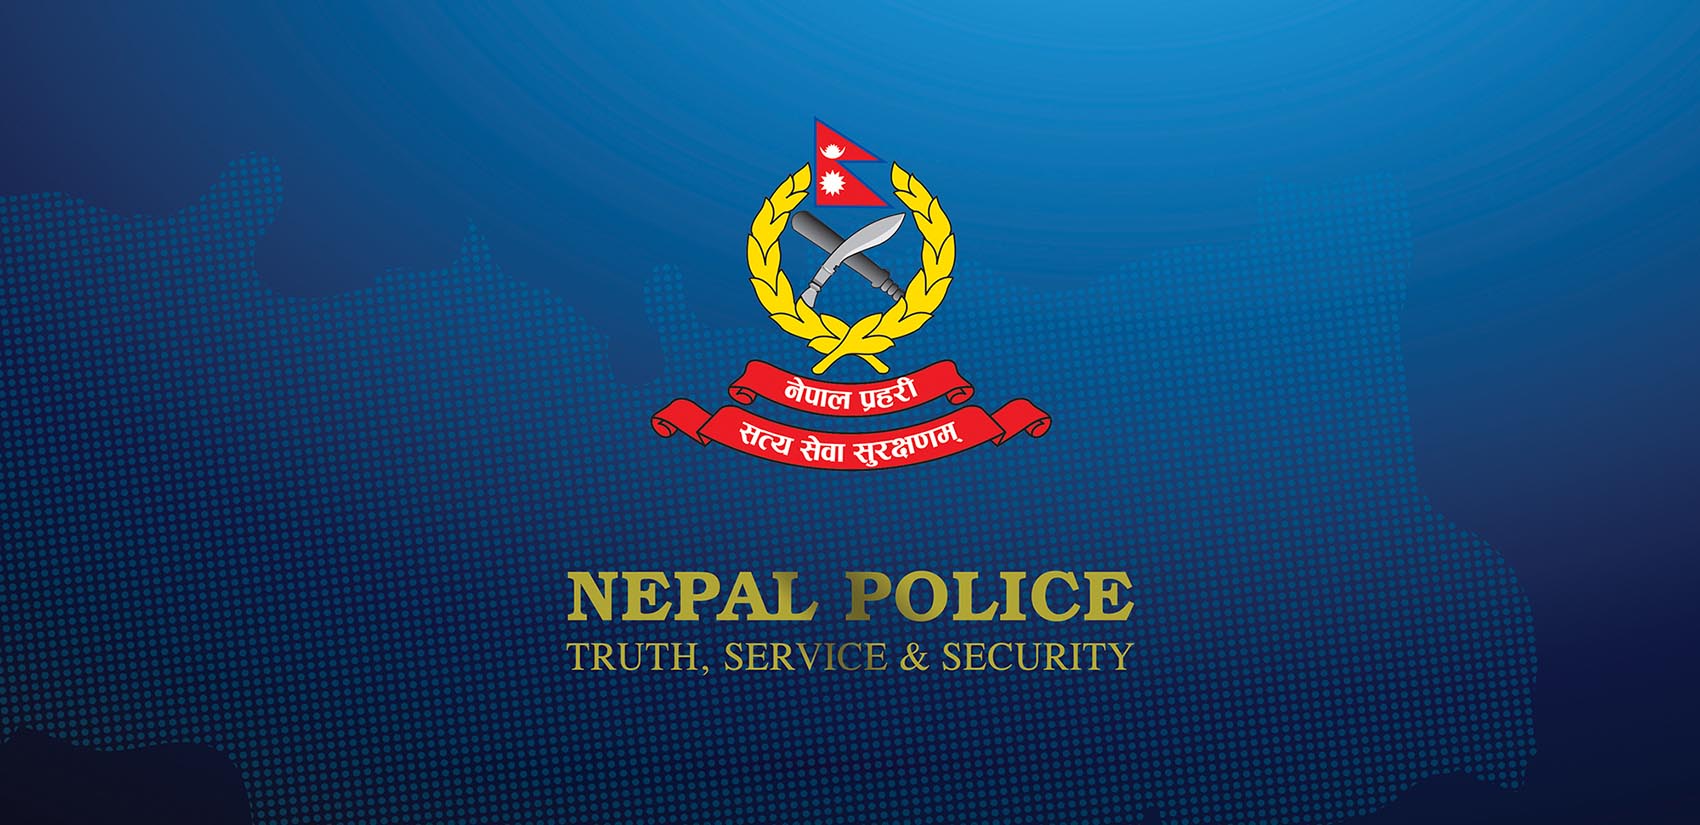 Nepal Police to get required resources: Chief Minister Poudel